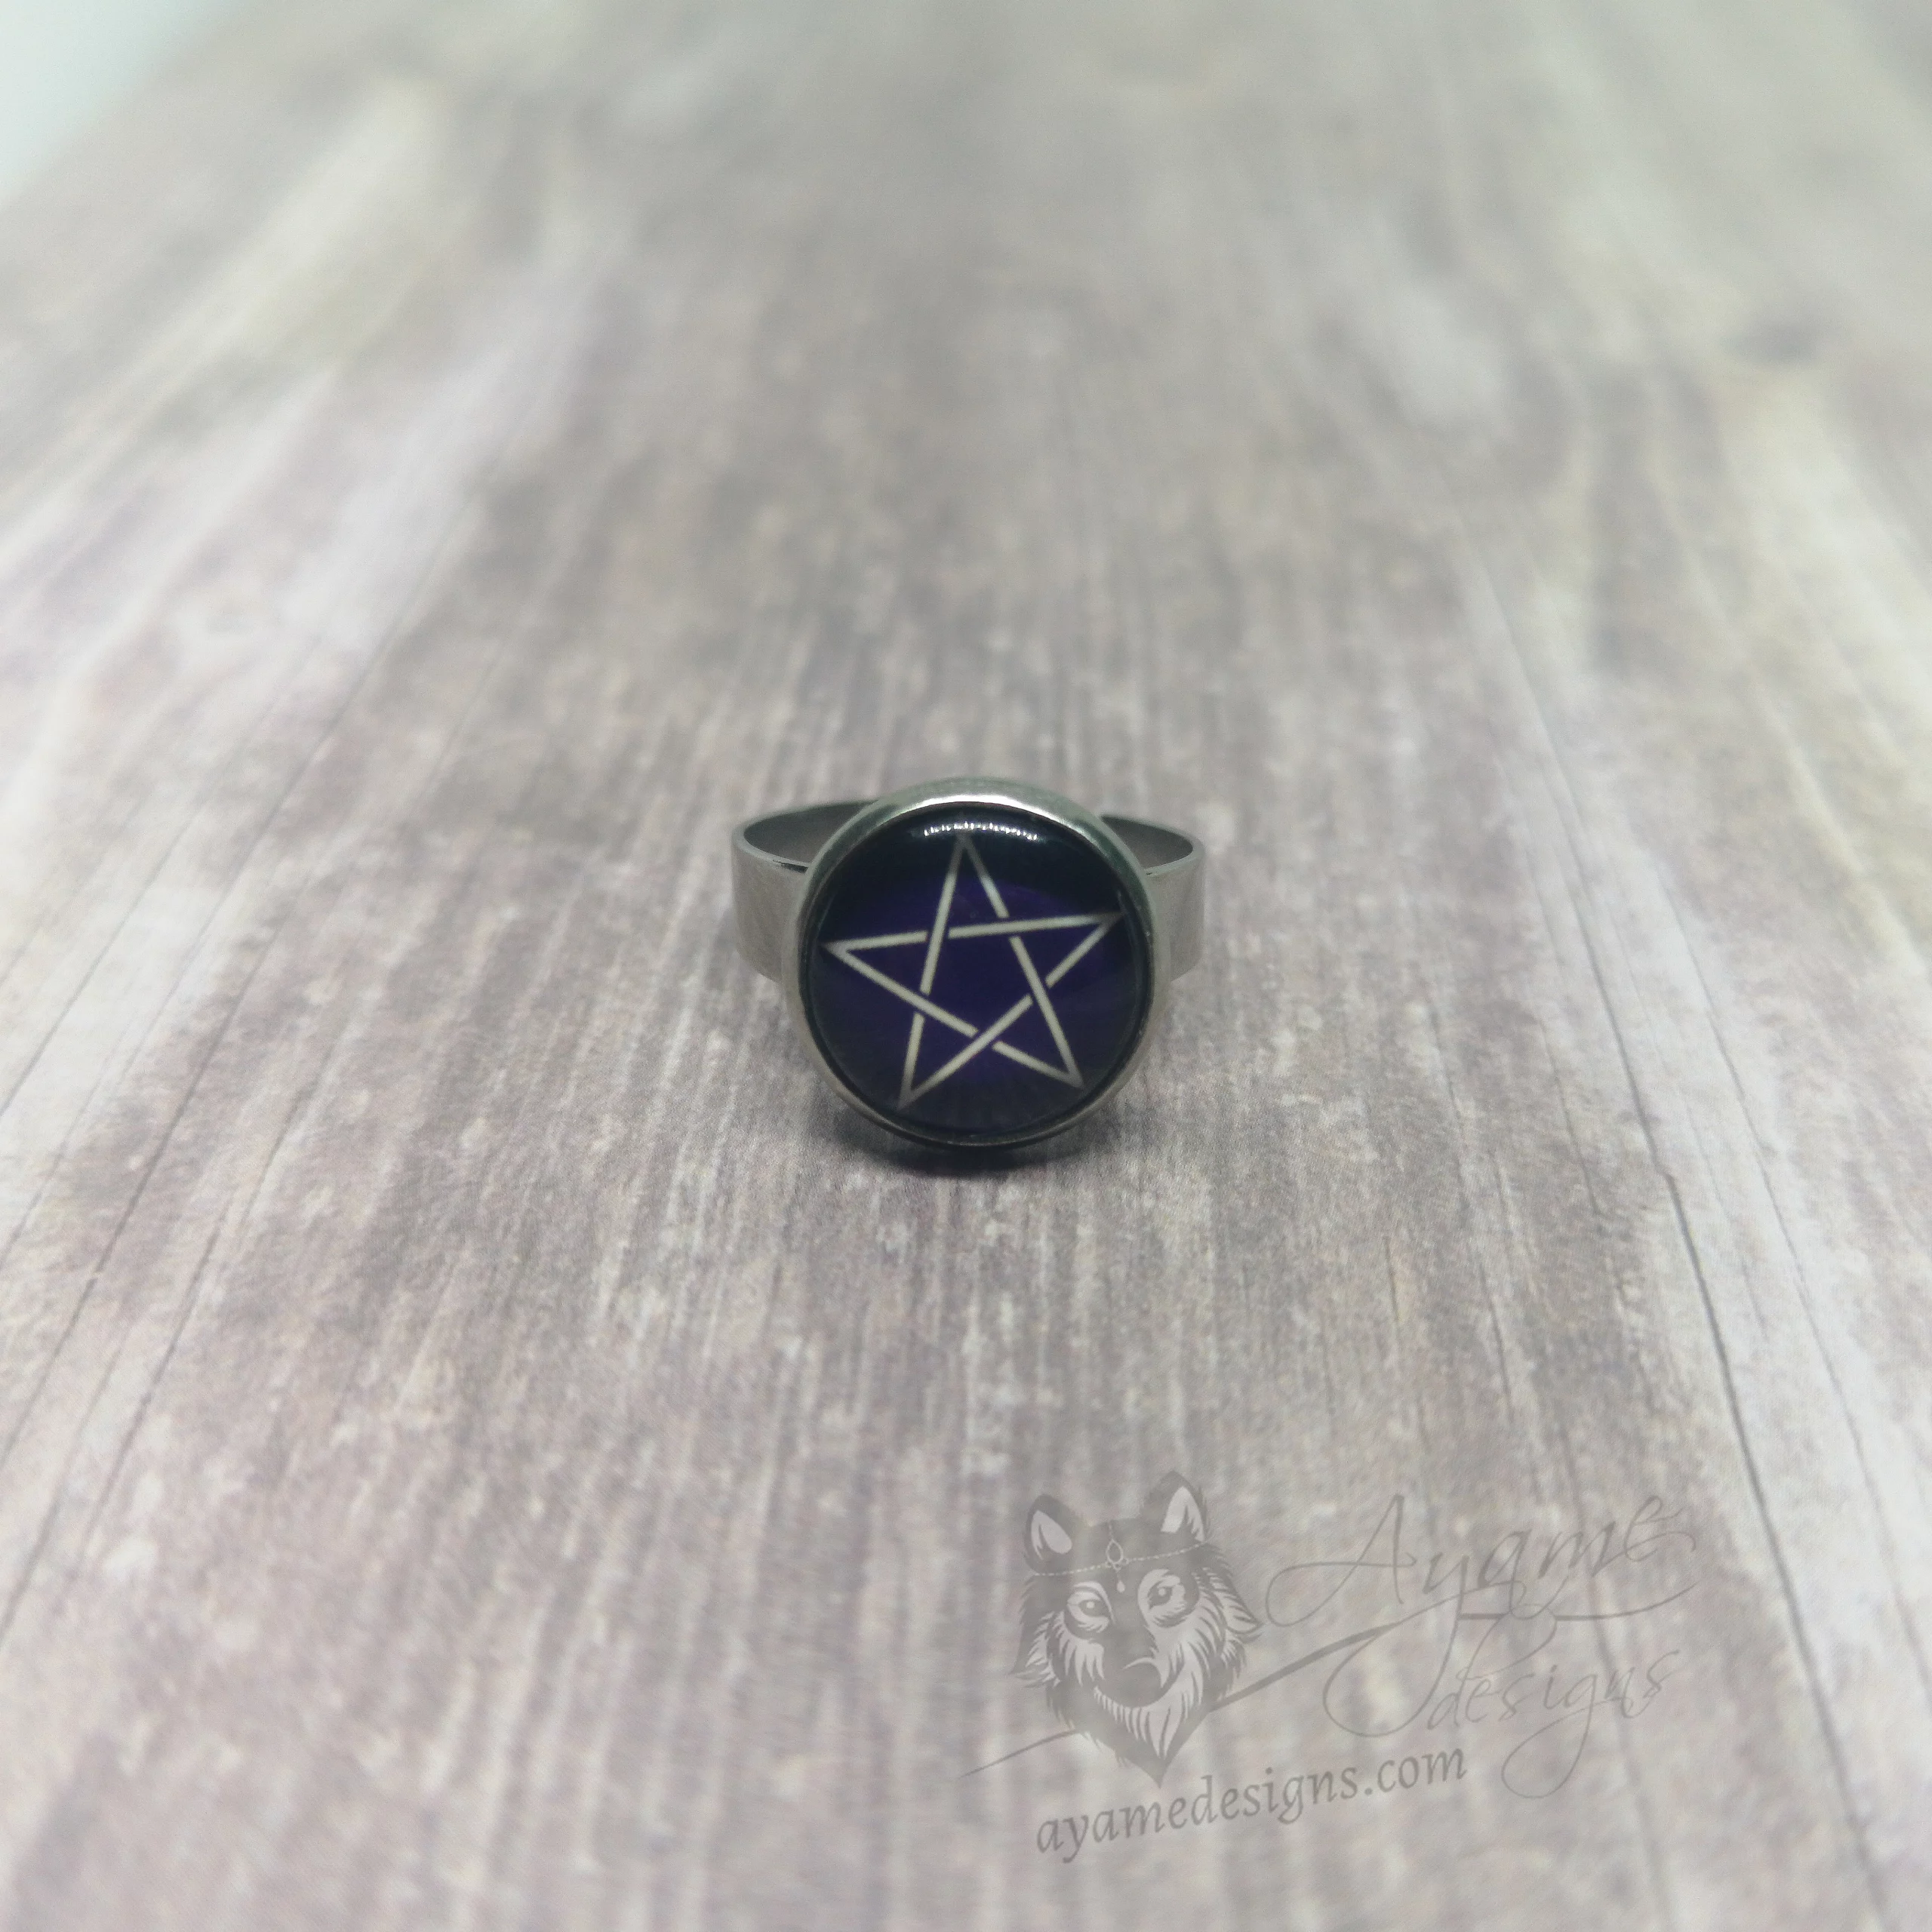 Adjustable stainless steel ring with glass pentagram cabochon